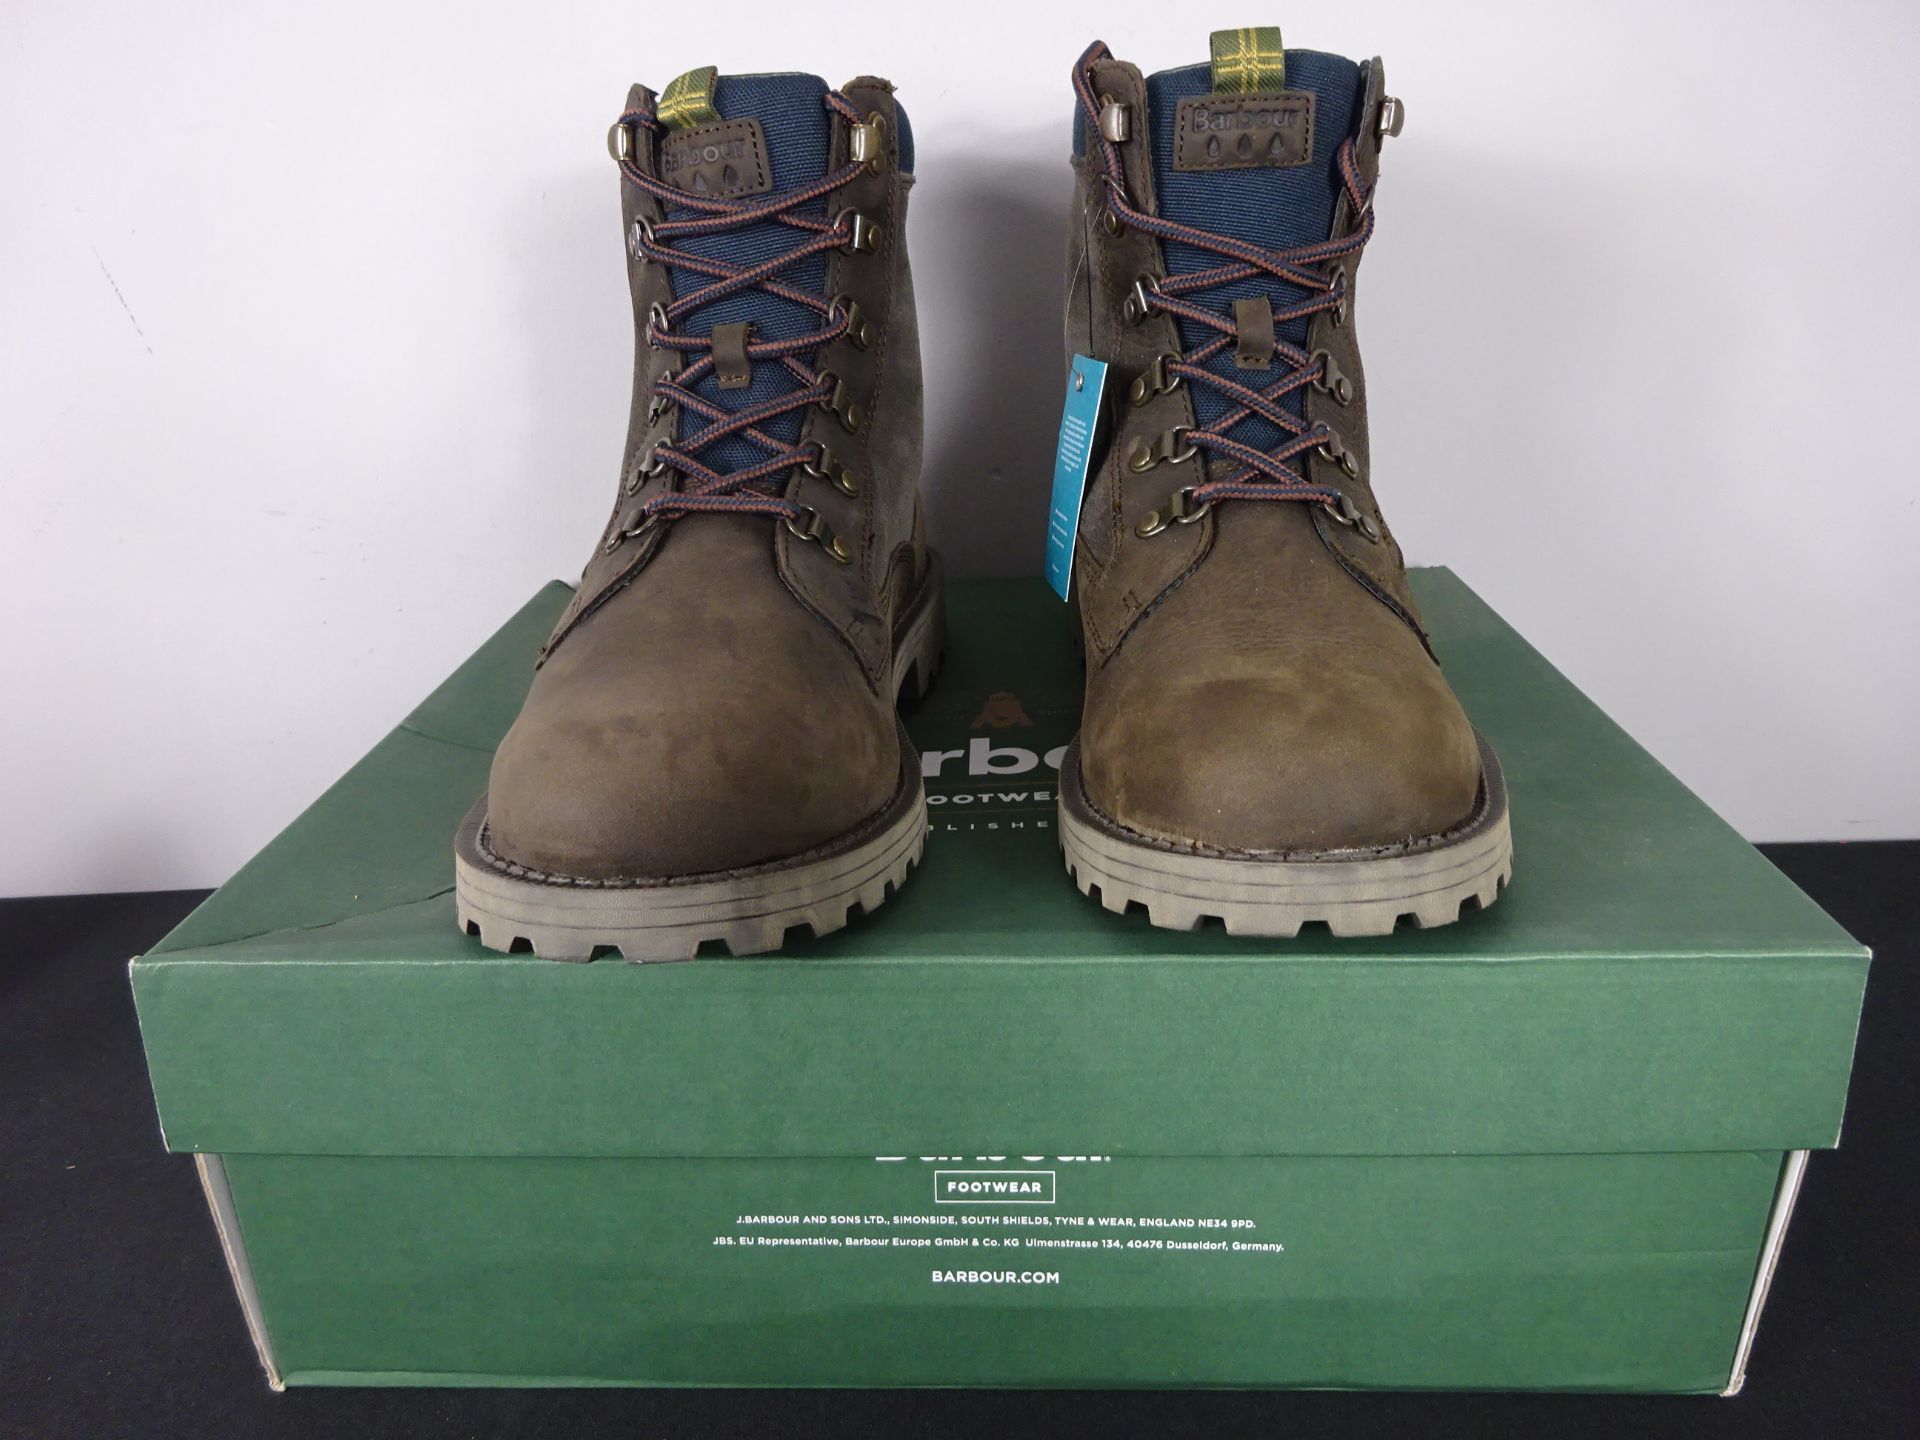 RRP £129.99 - New Barbour Chiltern Boots - Size 11. - Image 2 of 3